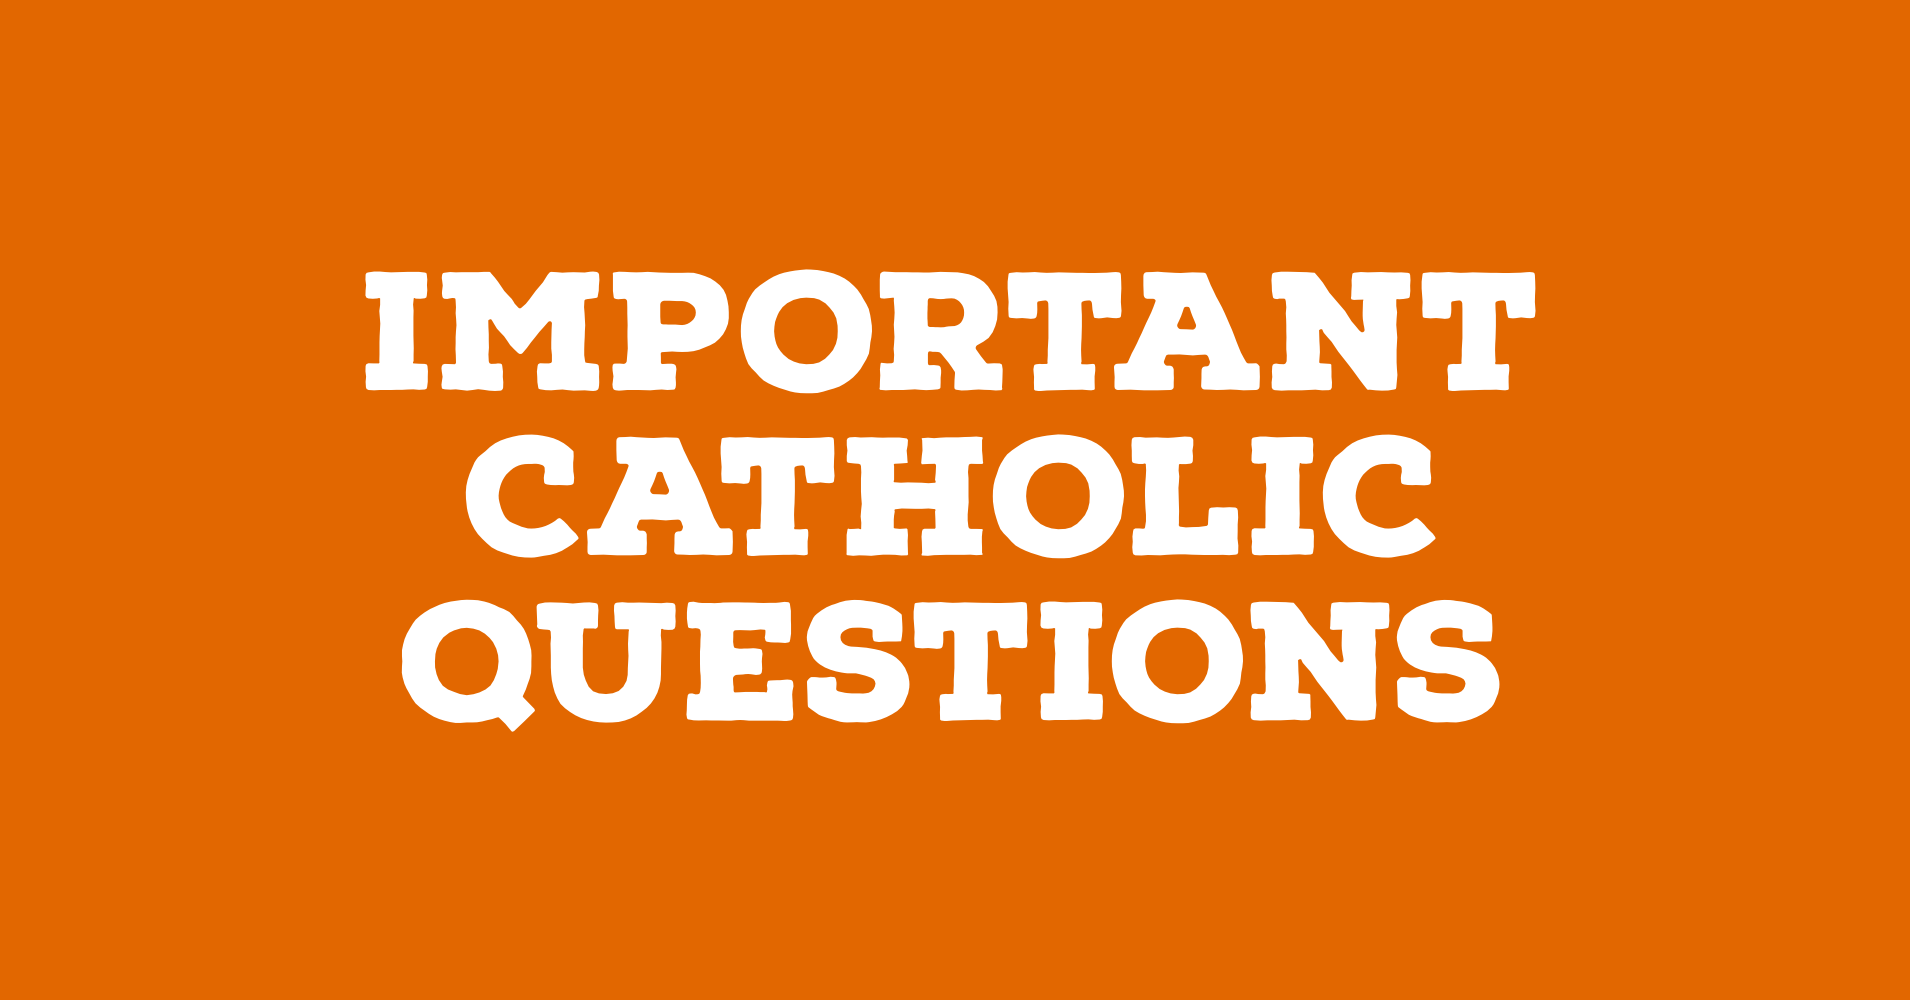 Important Catholic Questions.PNG